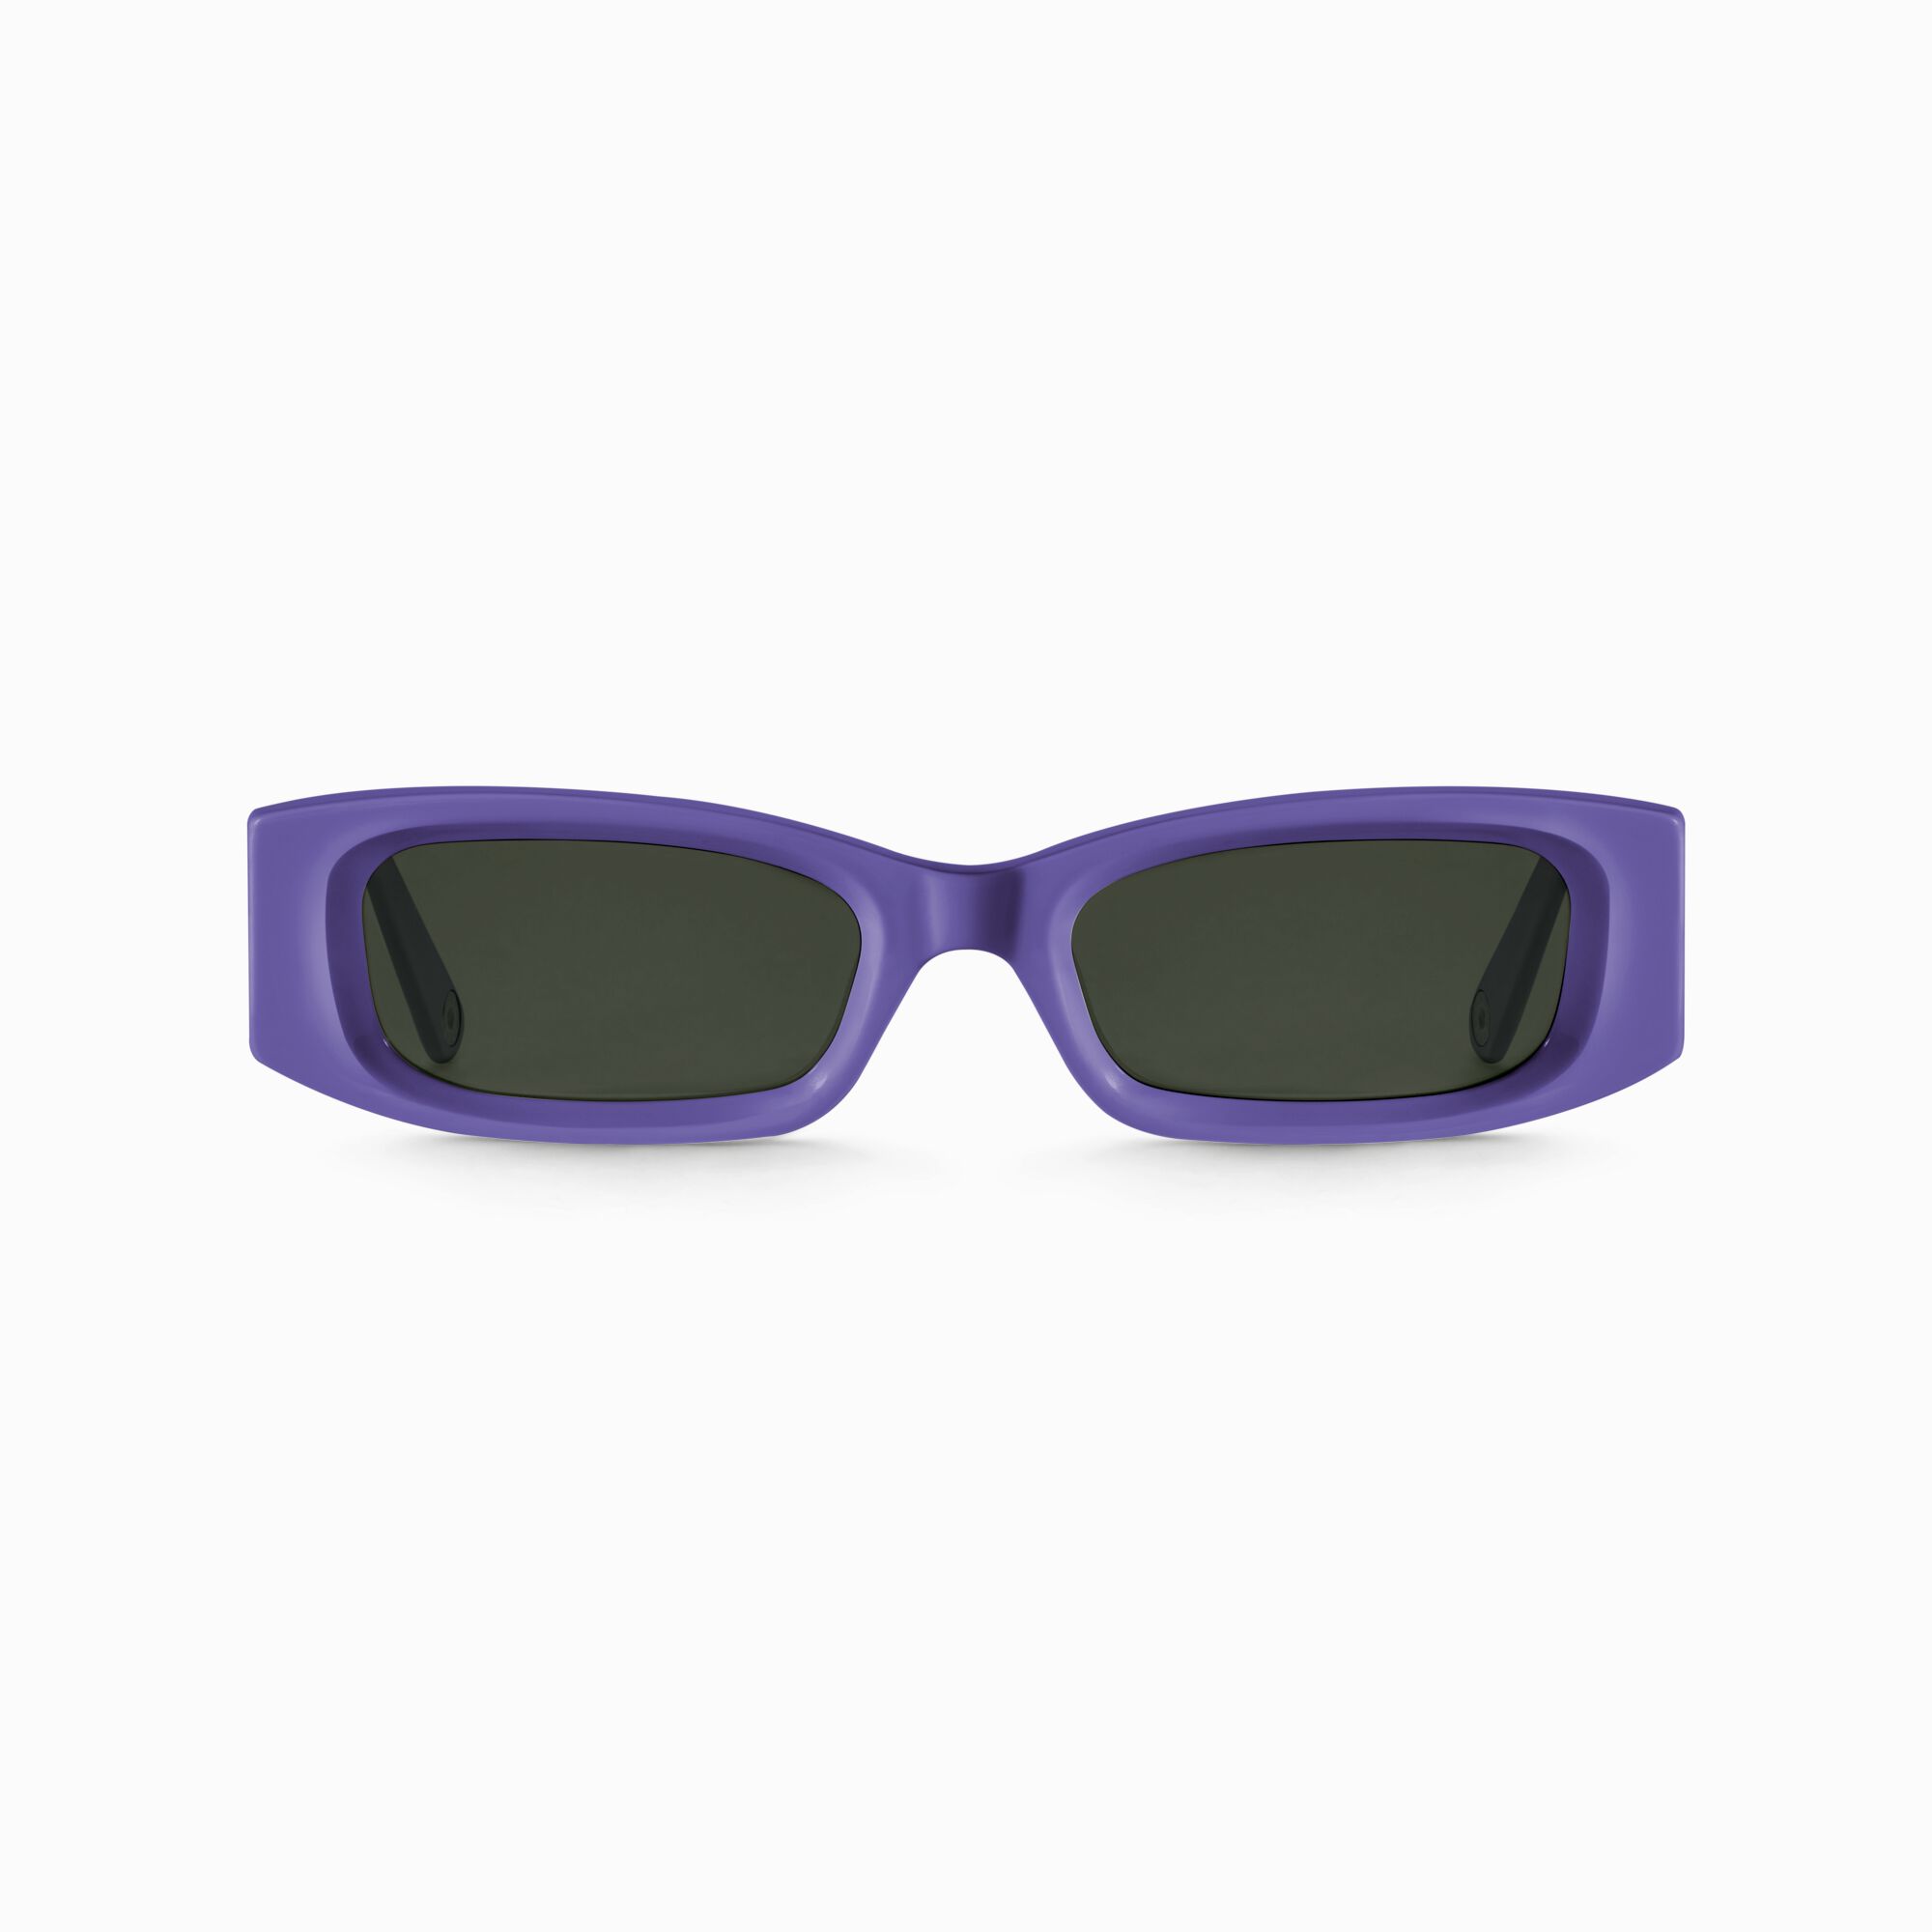 Sunglasses Kim slim rectangular violet from the  collection in the THOMAS SABO online store